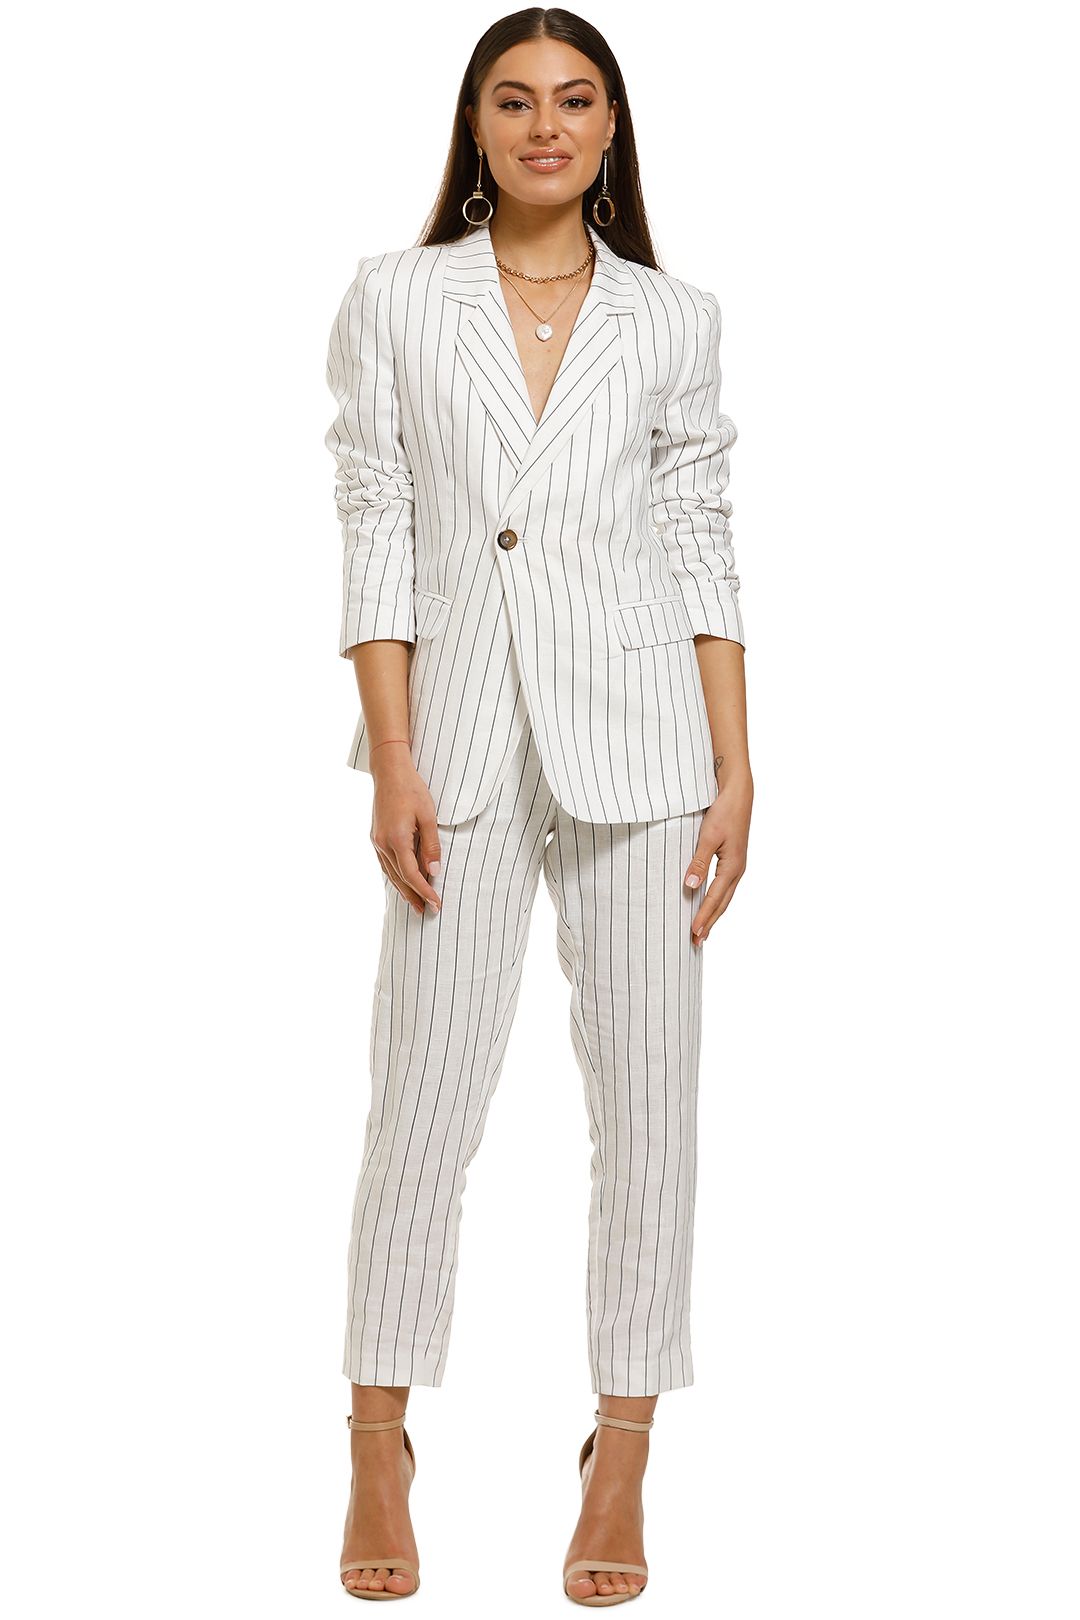 FWRD-The-Label-Cecilia-Jacket-and-Pant-Set-Black-White-Stripe-Front